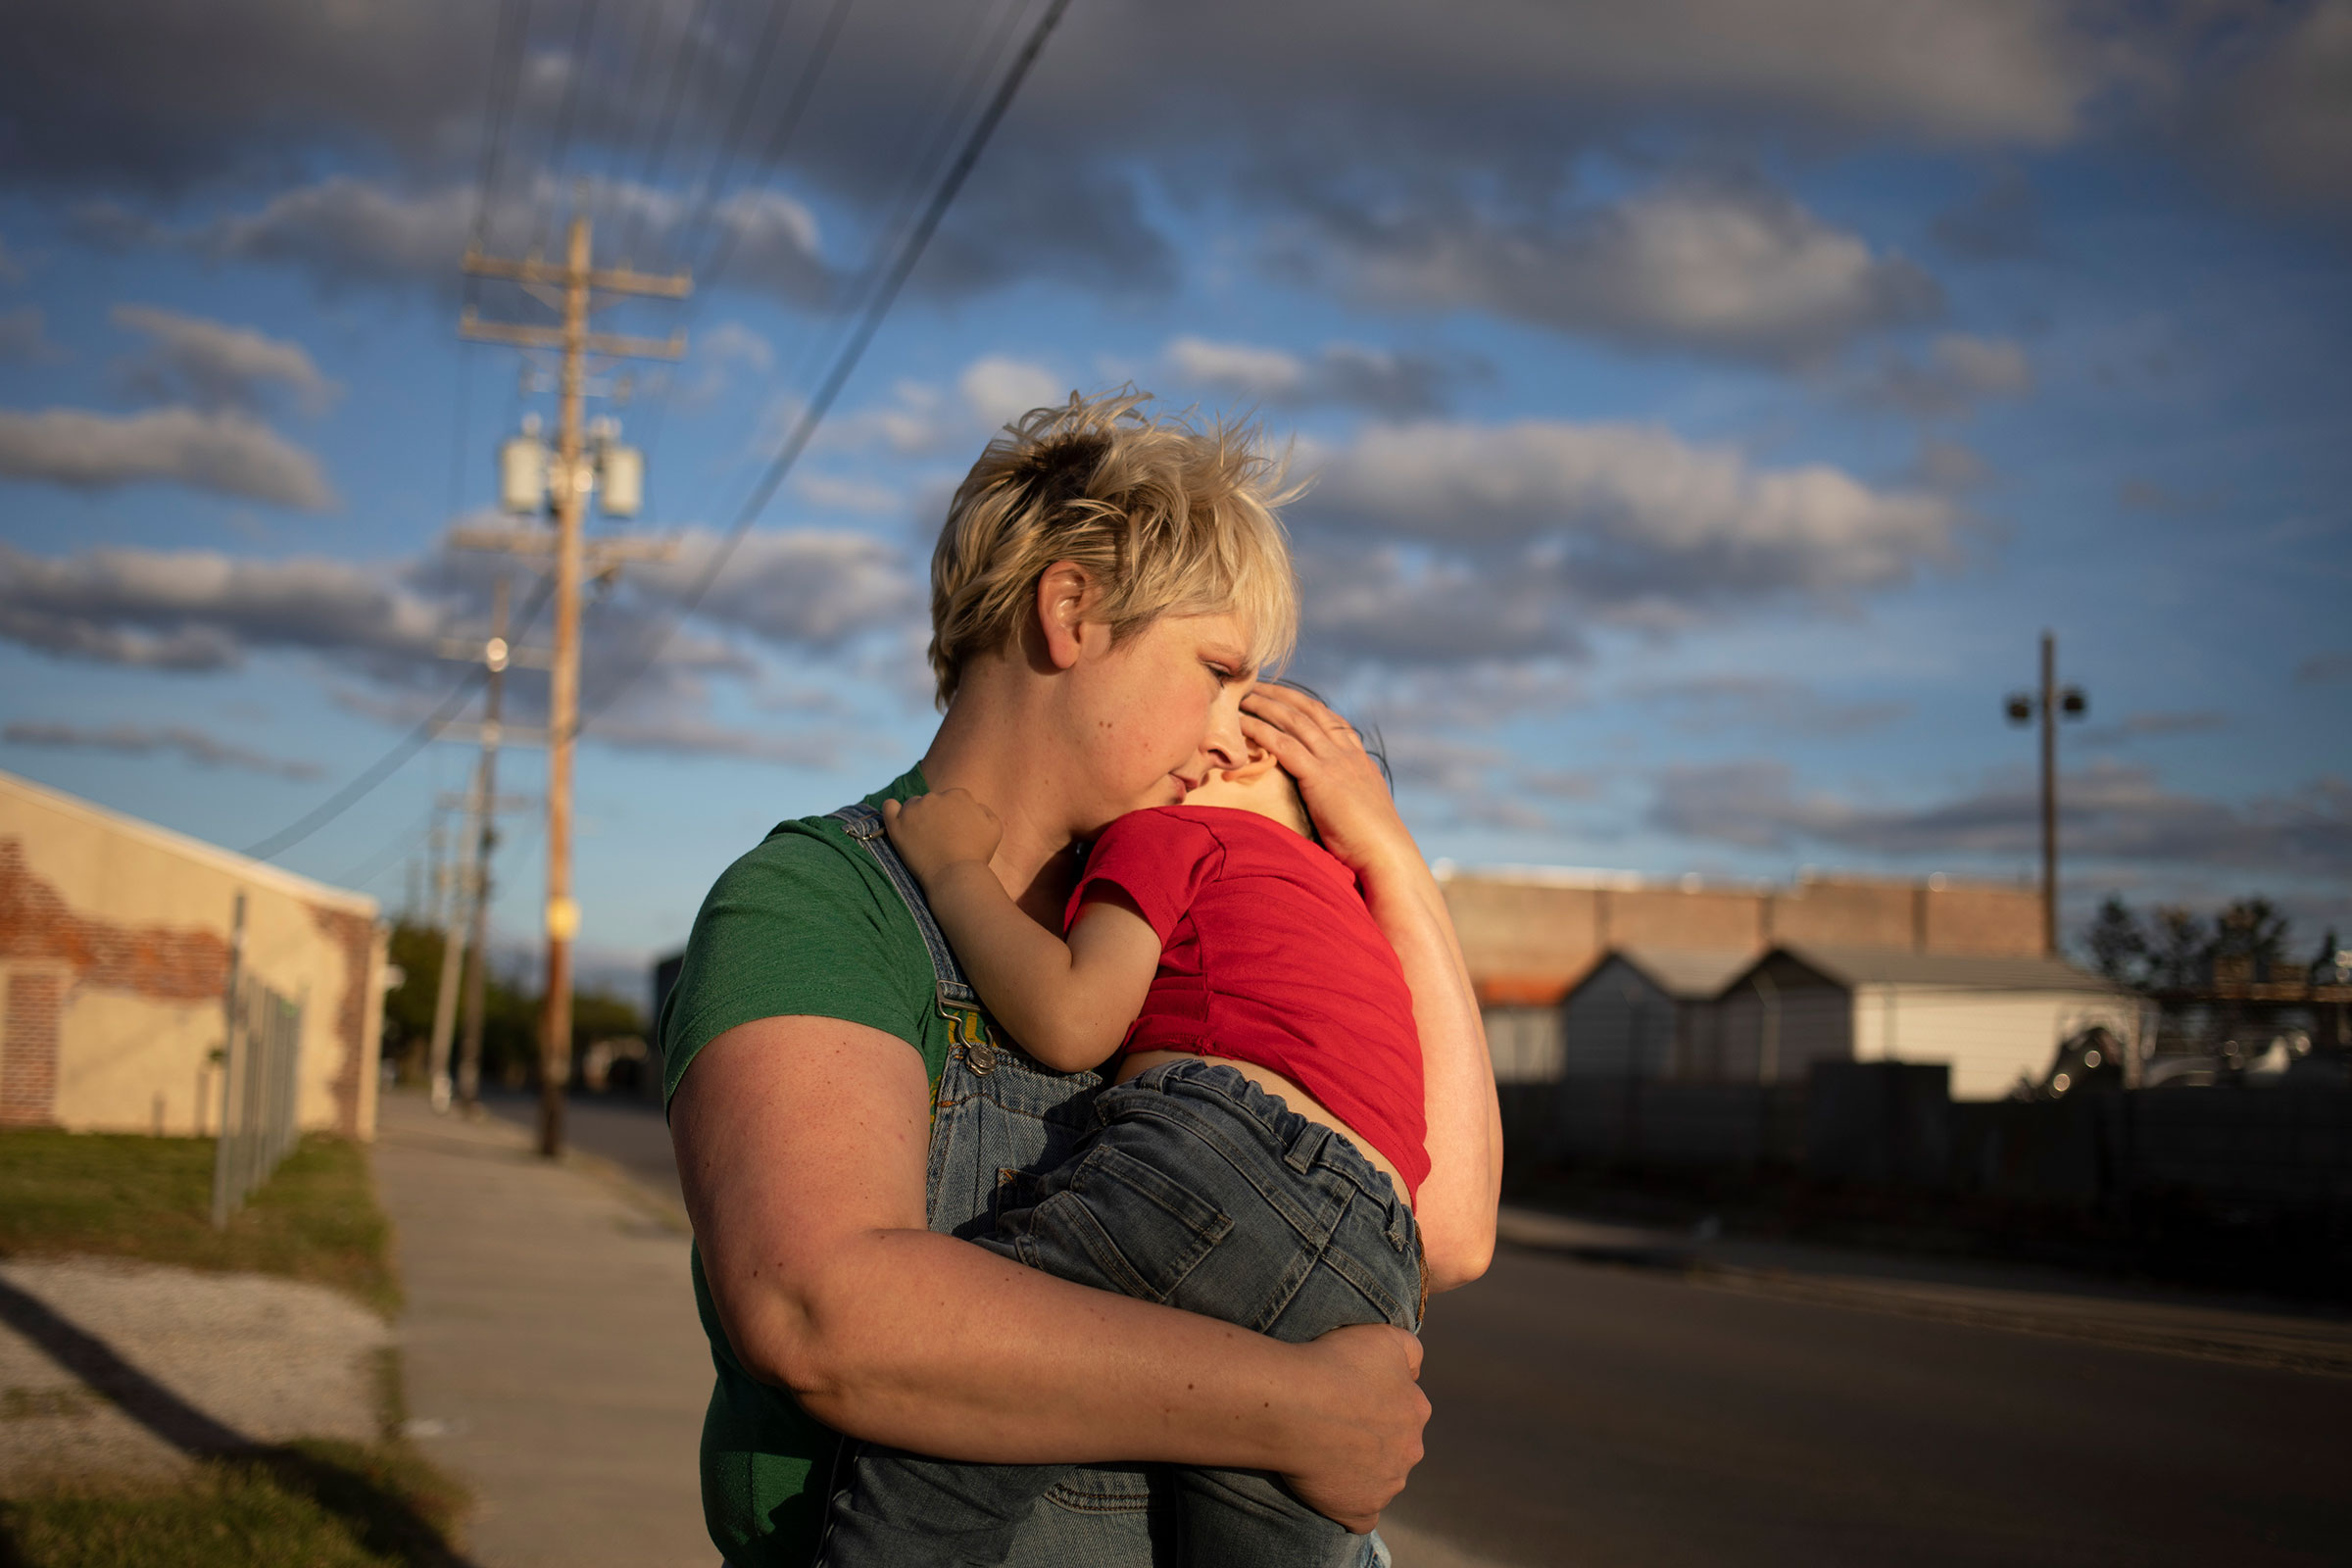 Laurie Halbrook, a <a href="https://time.com/collection/coronavirus-heroes/5816899/nurse-family-coronavirus/" target="_blank" rel="noopener noreferrer">registered nurse</a>, holds her son Michael, 3, during a walk through their neighborhood in New Orleans. (Kathleen Flynn for TIME)